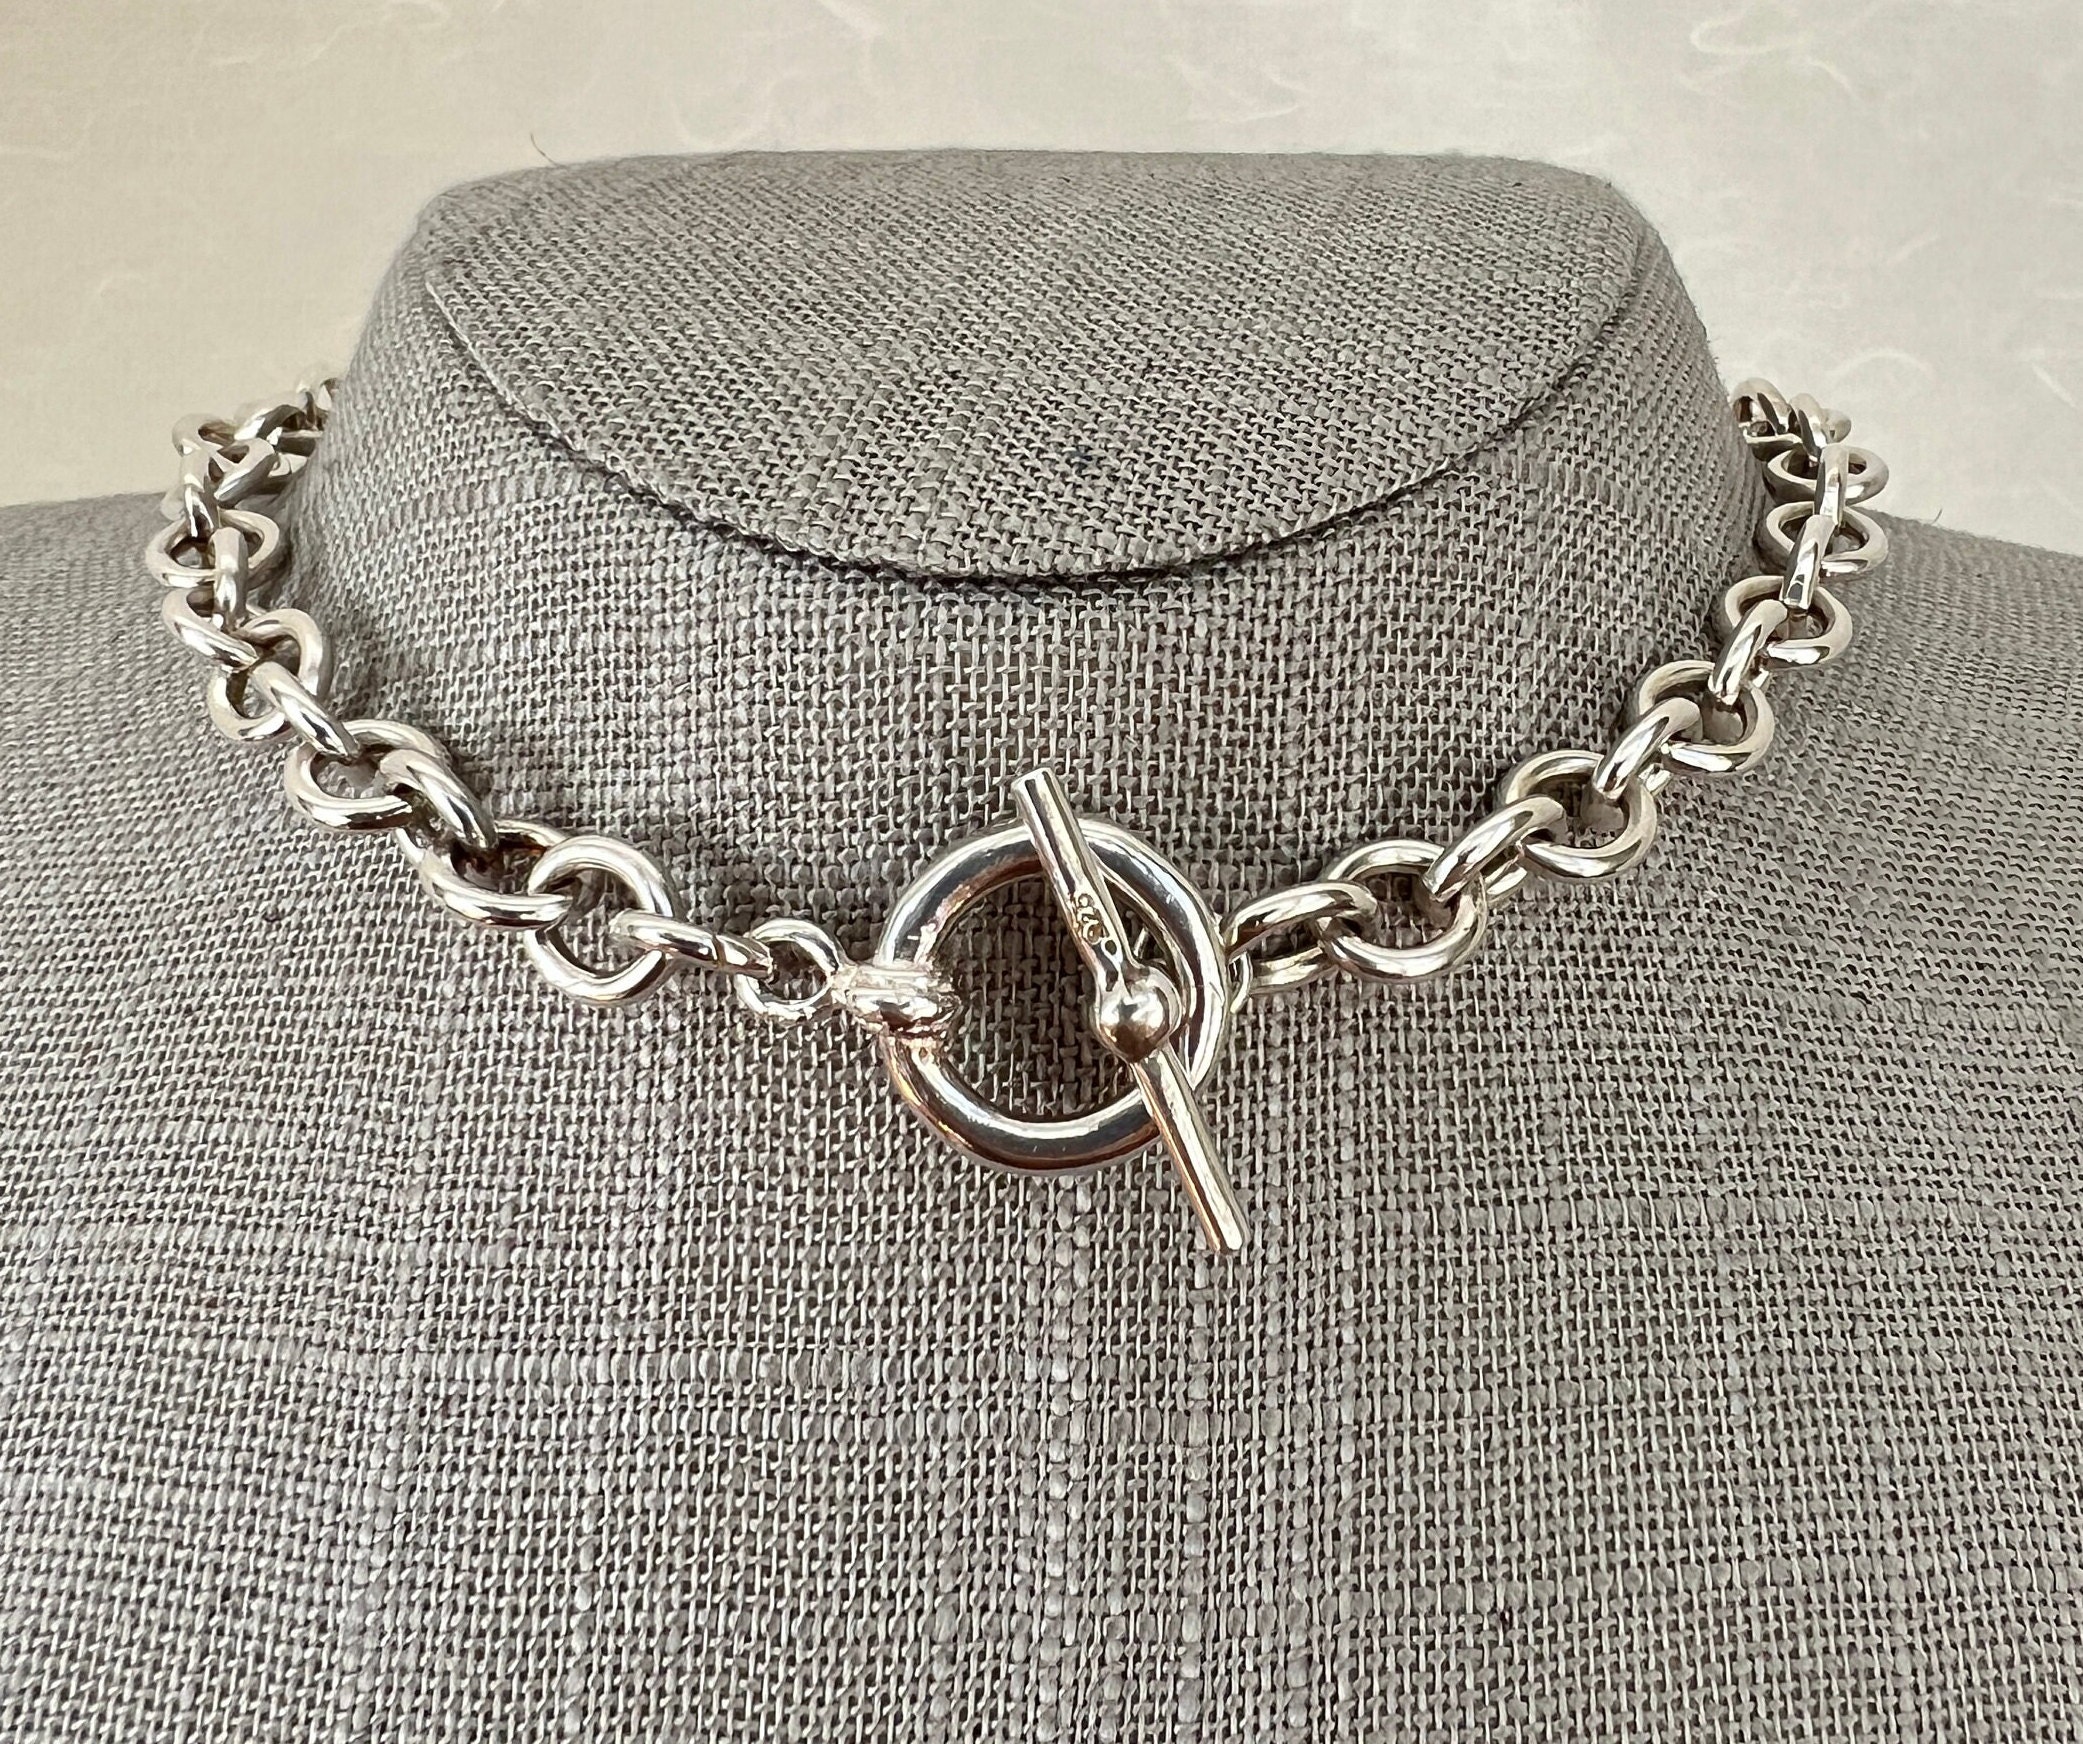 Nightrider Toggle Chain | 925 Sterling Silver Necklace Chain | 6mm Thick, 30” Length | USA Handcrafted Silver Chain Necklace